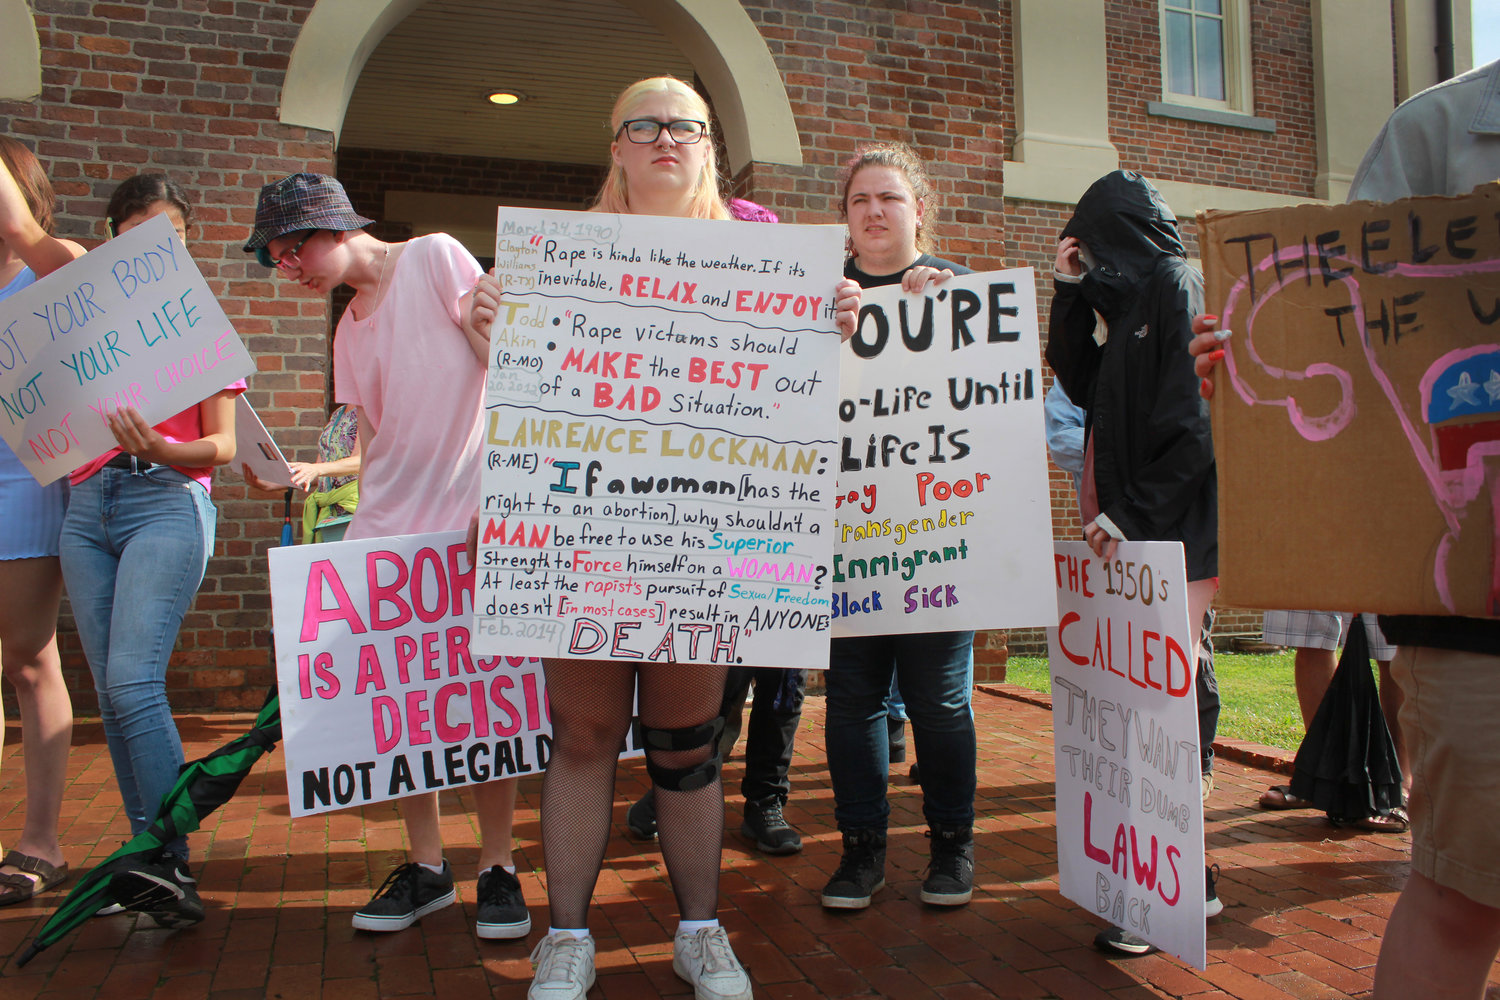 Protesters hold signs outside of the Pittsboro Historic Courthouse  during the abortion and women’s rights protest on Monday in Pittsboro. Dozens of people gathered at the courthouse as a reaction to the overturning of Roe v. Wade.